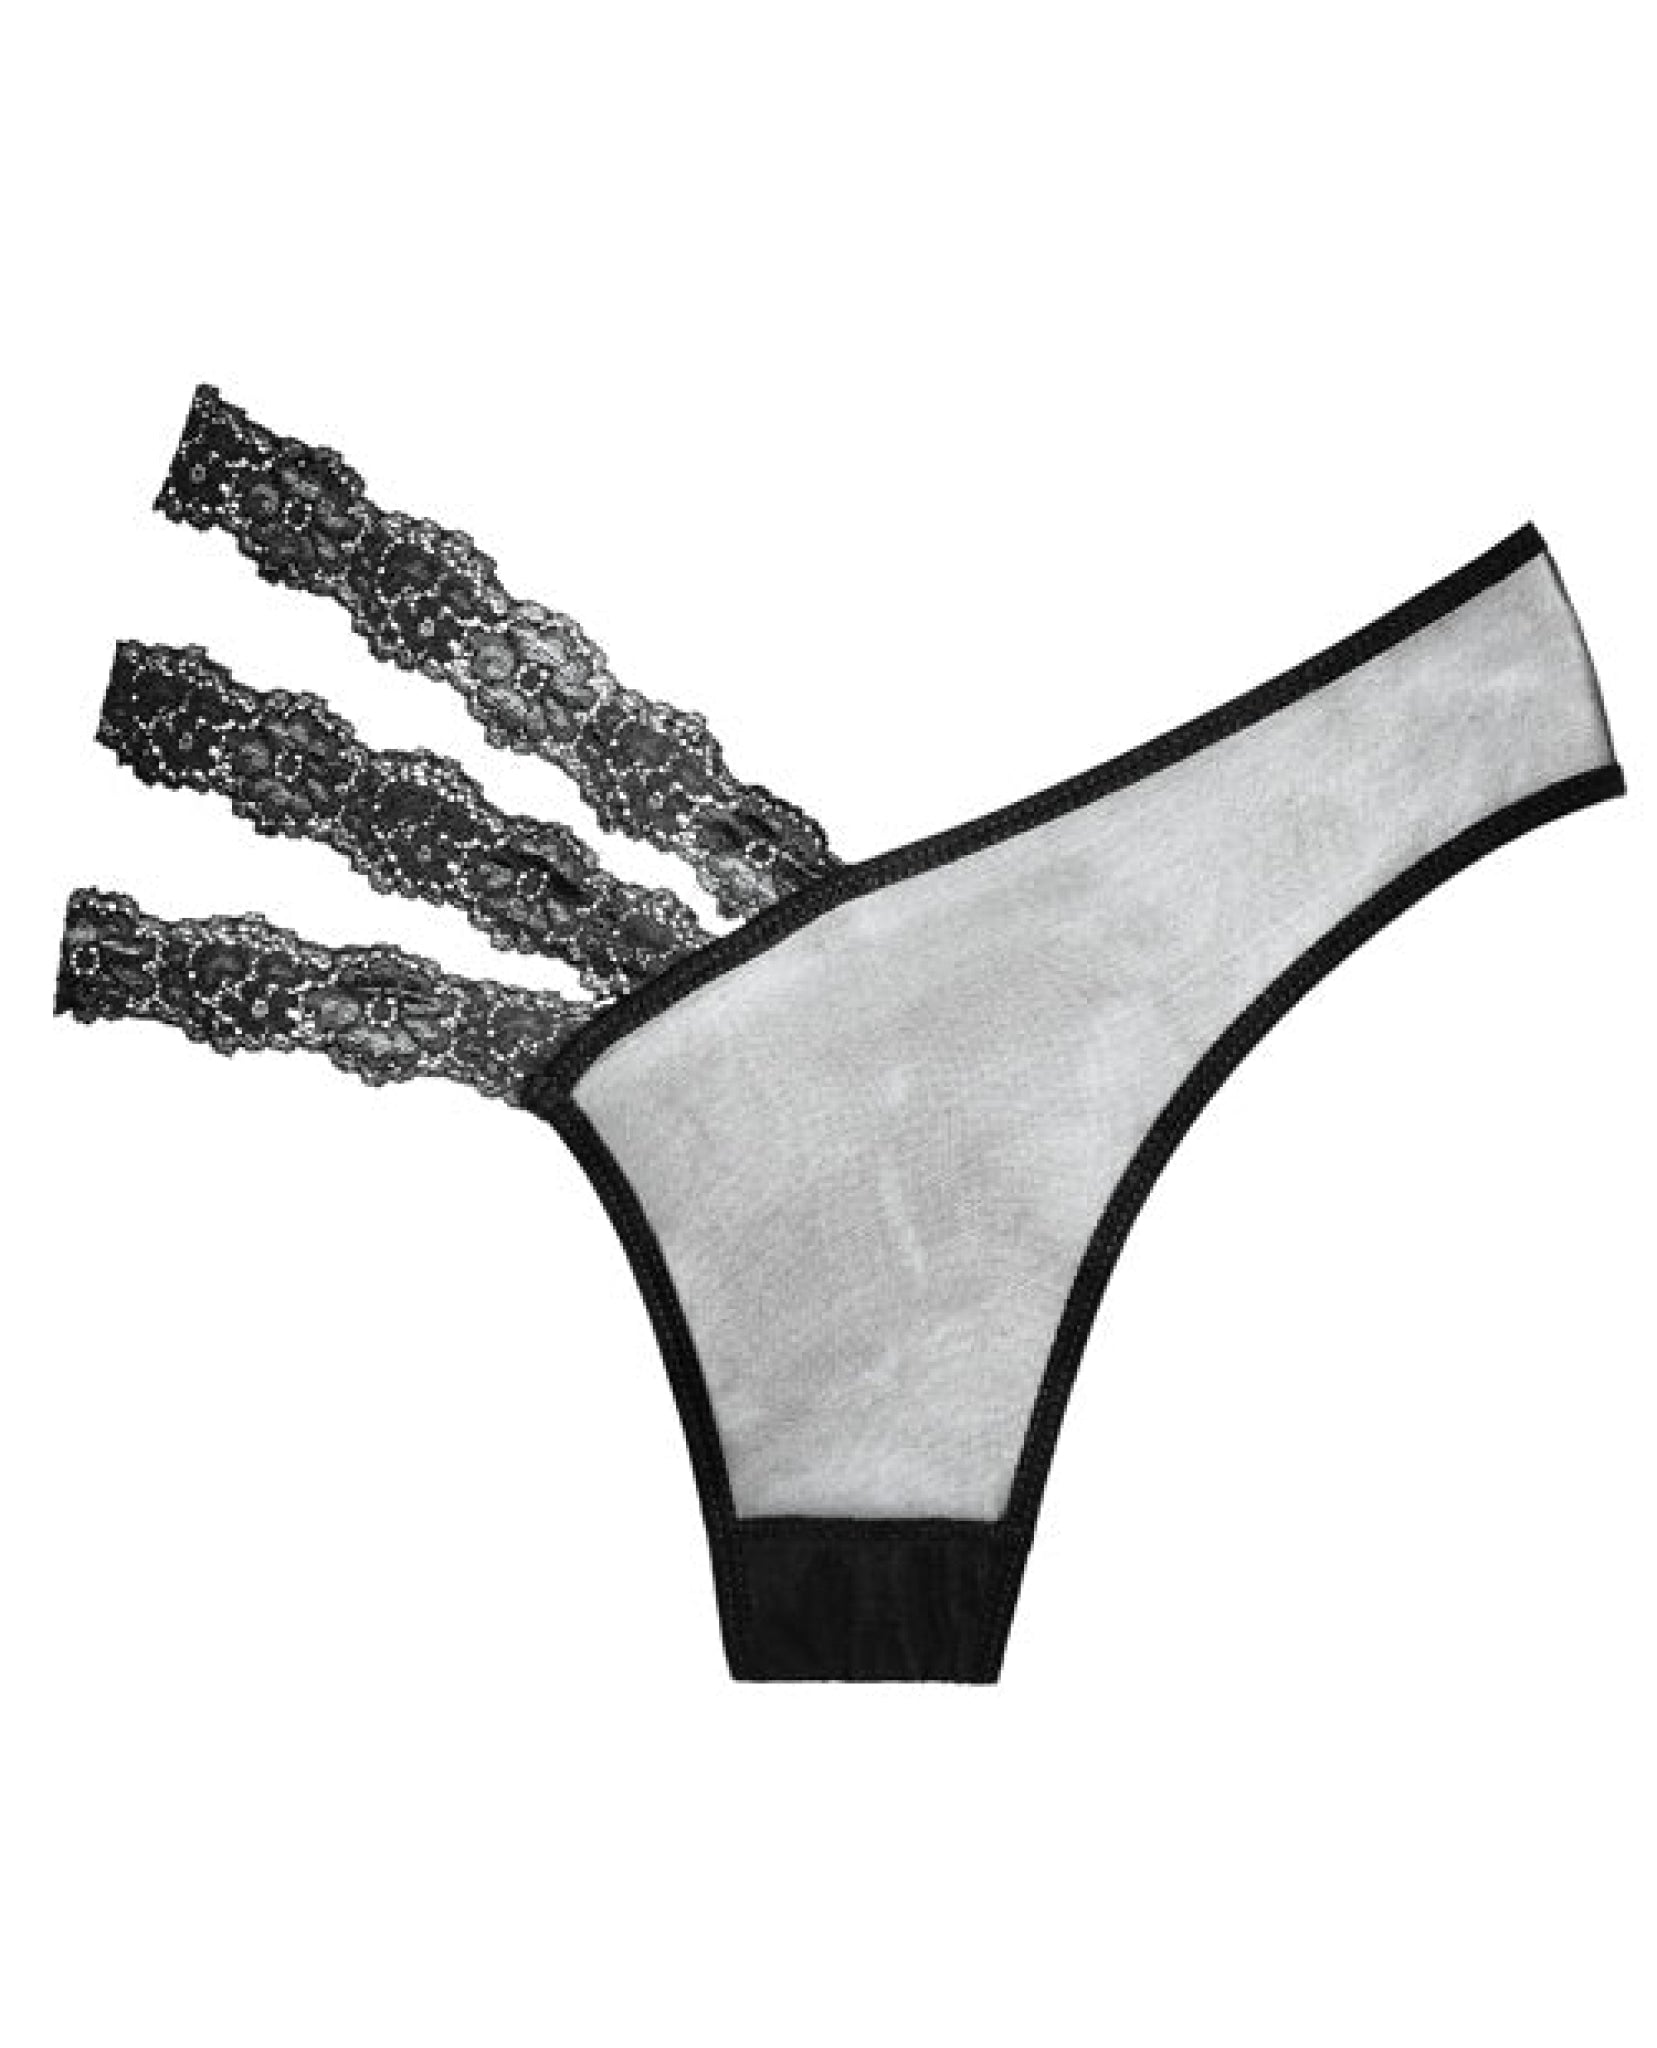 Adore Sheer & Lace Wild Orchid Panty Black O-s Allure